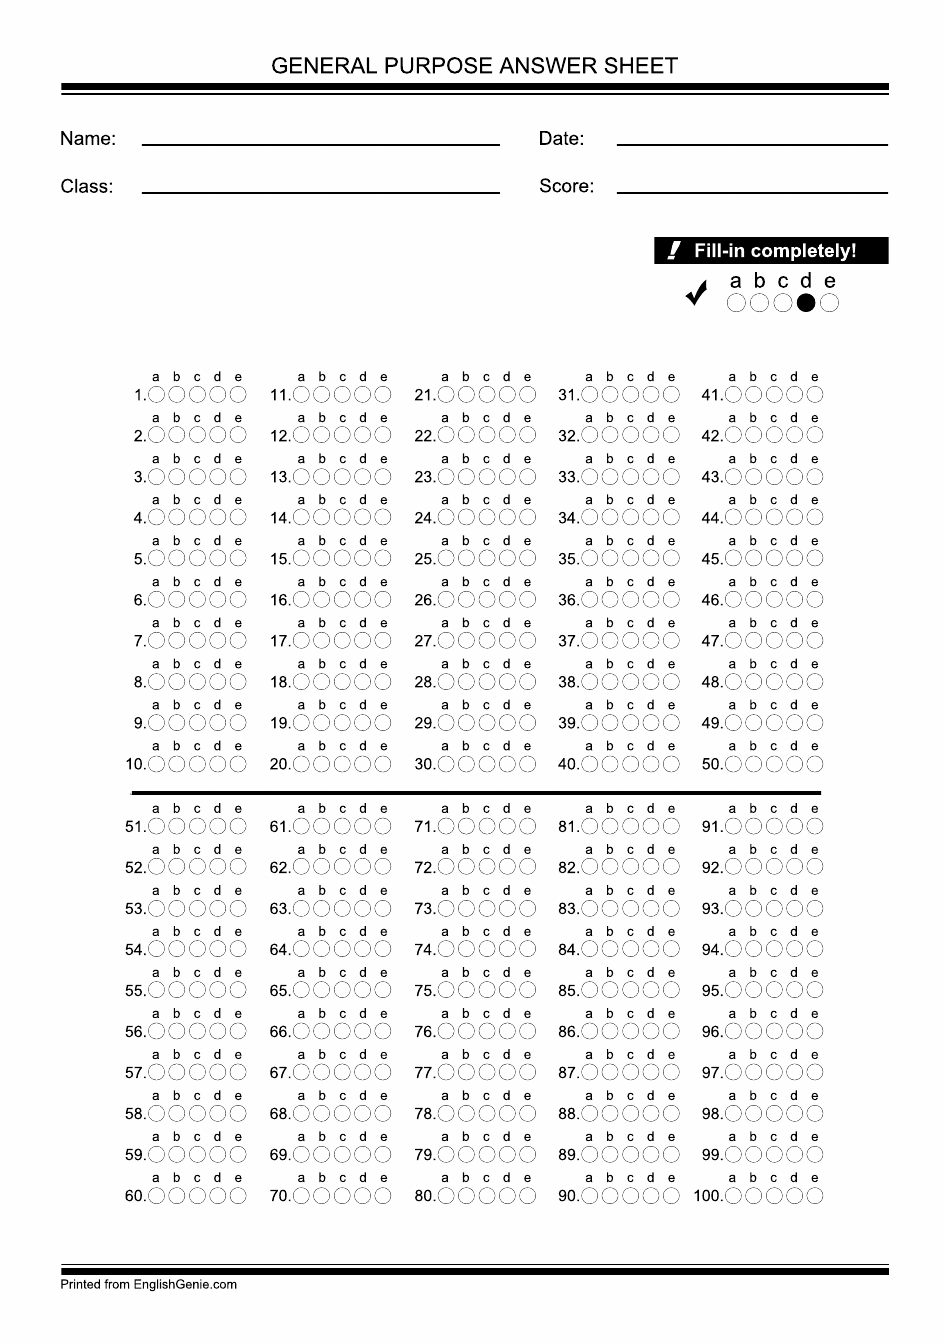 General Purpose Answer Sheet Template Preview Image